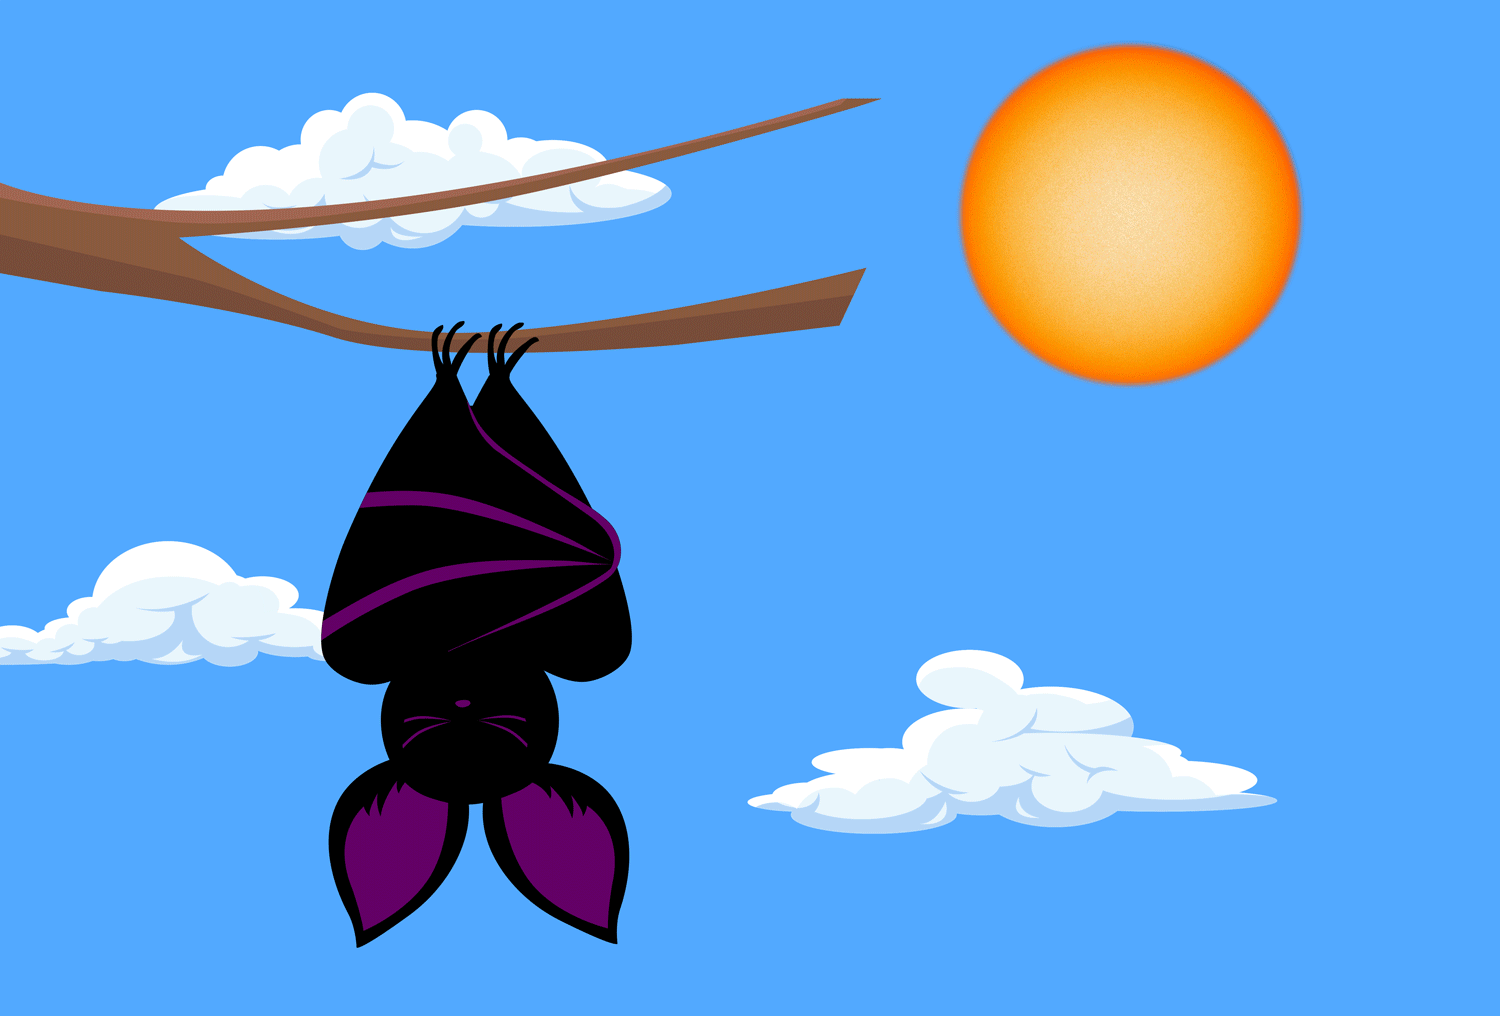 A bat that is sleeping while hanging upside down on a branch opens its eyes when the Moon blocks the Sun.